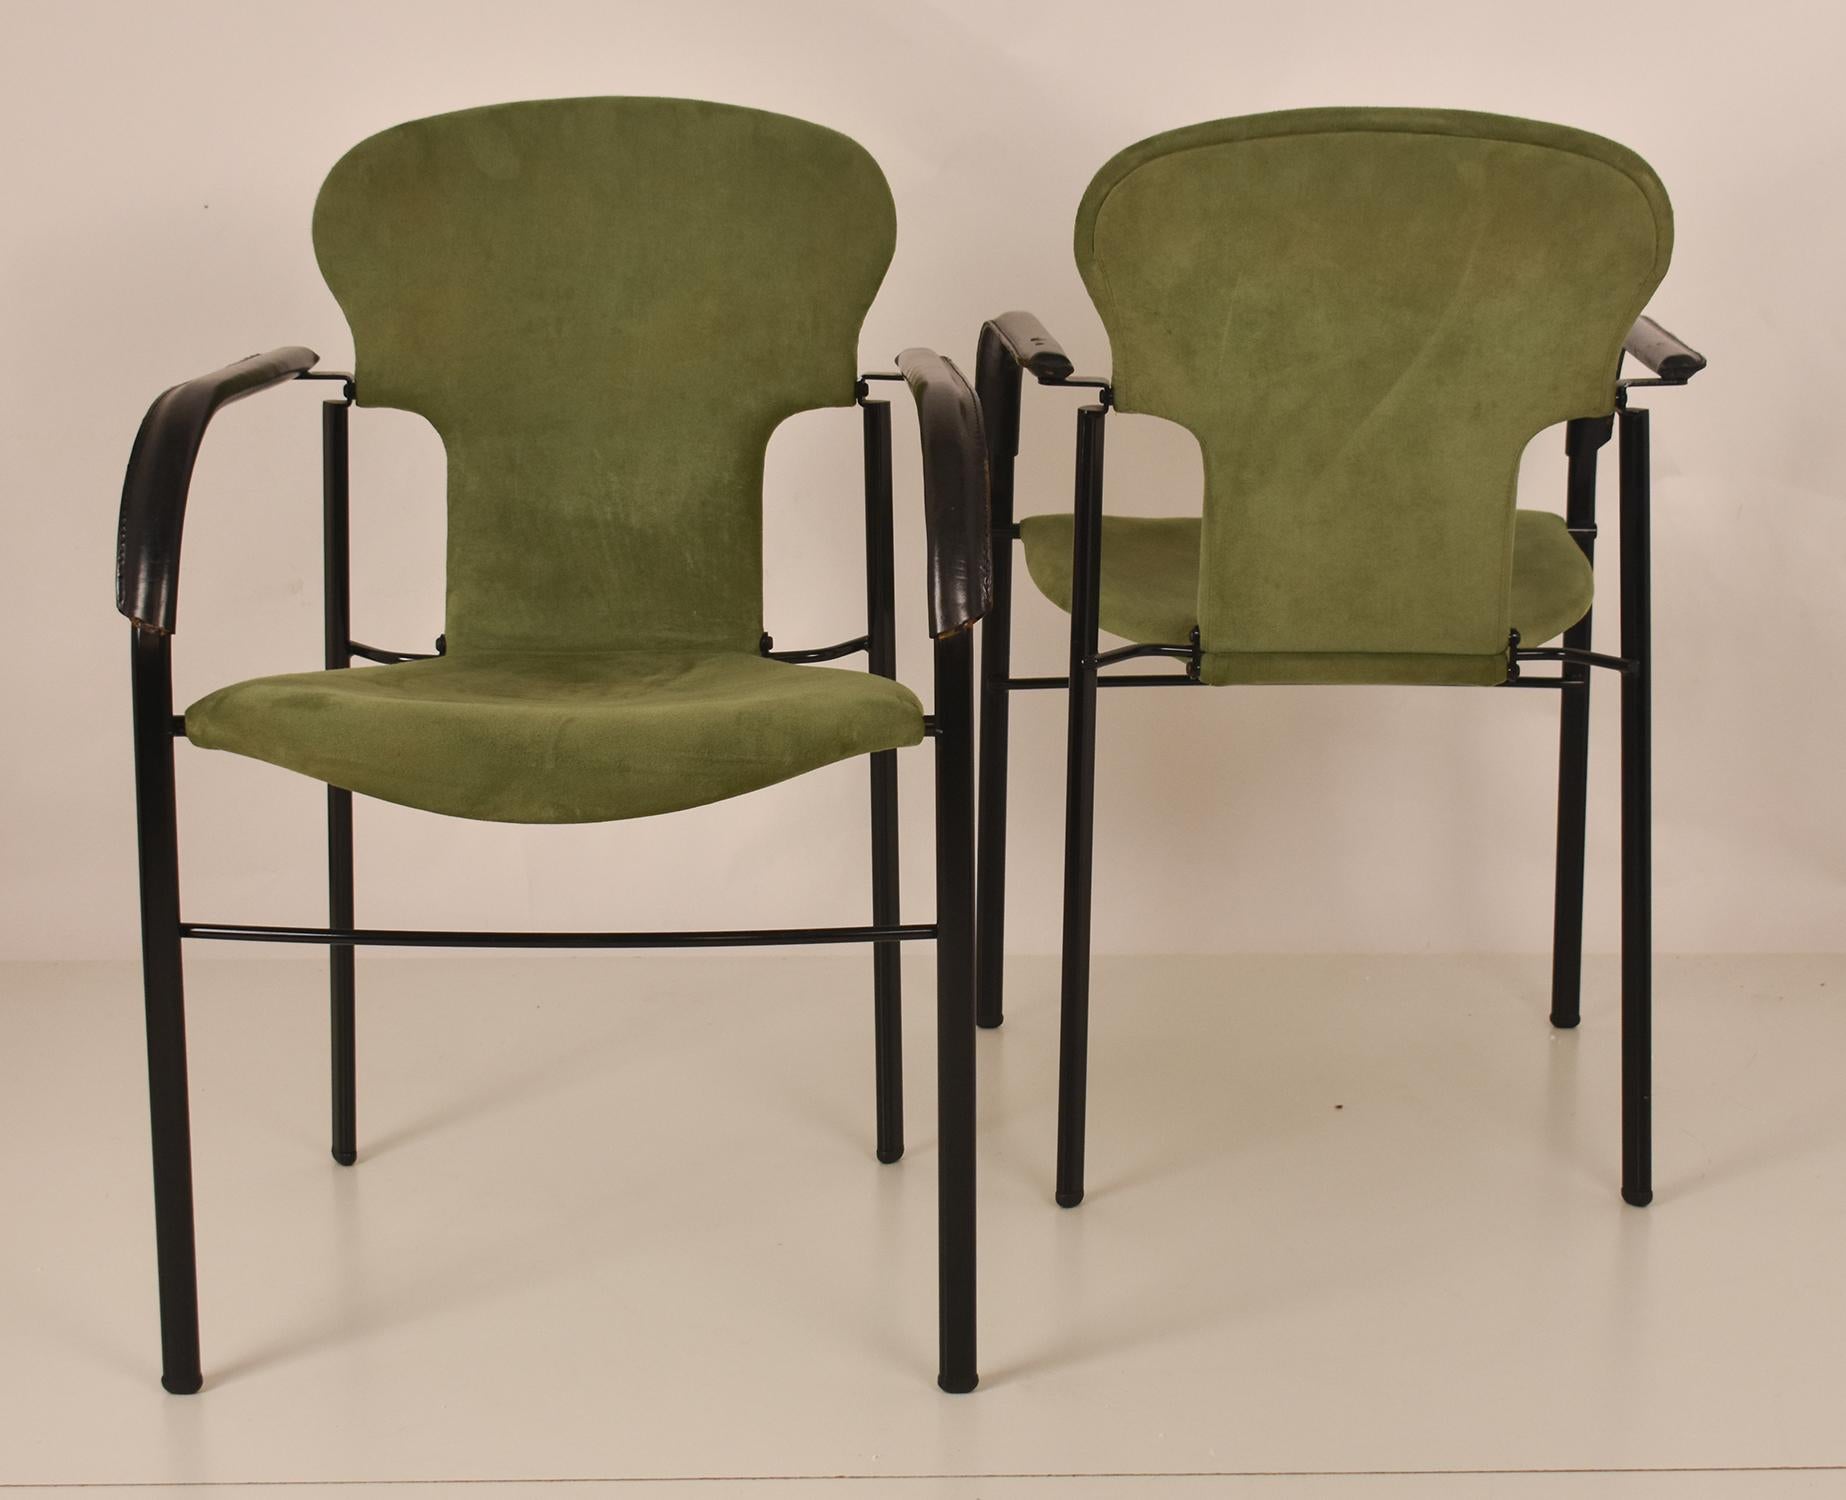 Spanish Pair of Varius Green Armchair  Designed by Oscar Tusquets in 1983. Spain